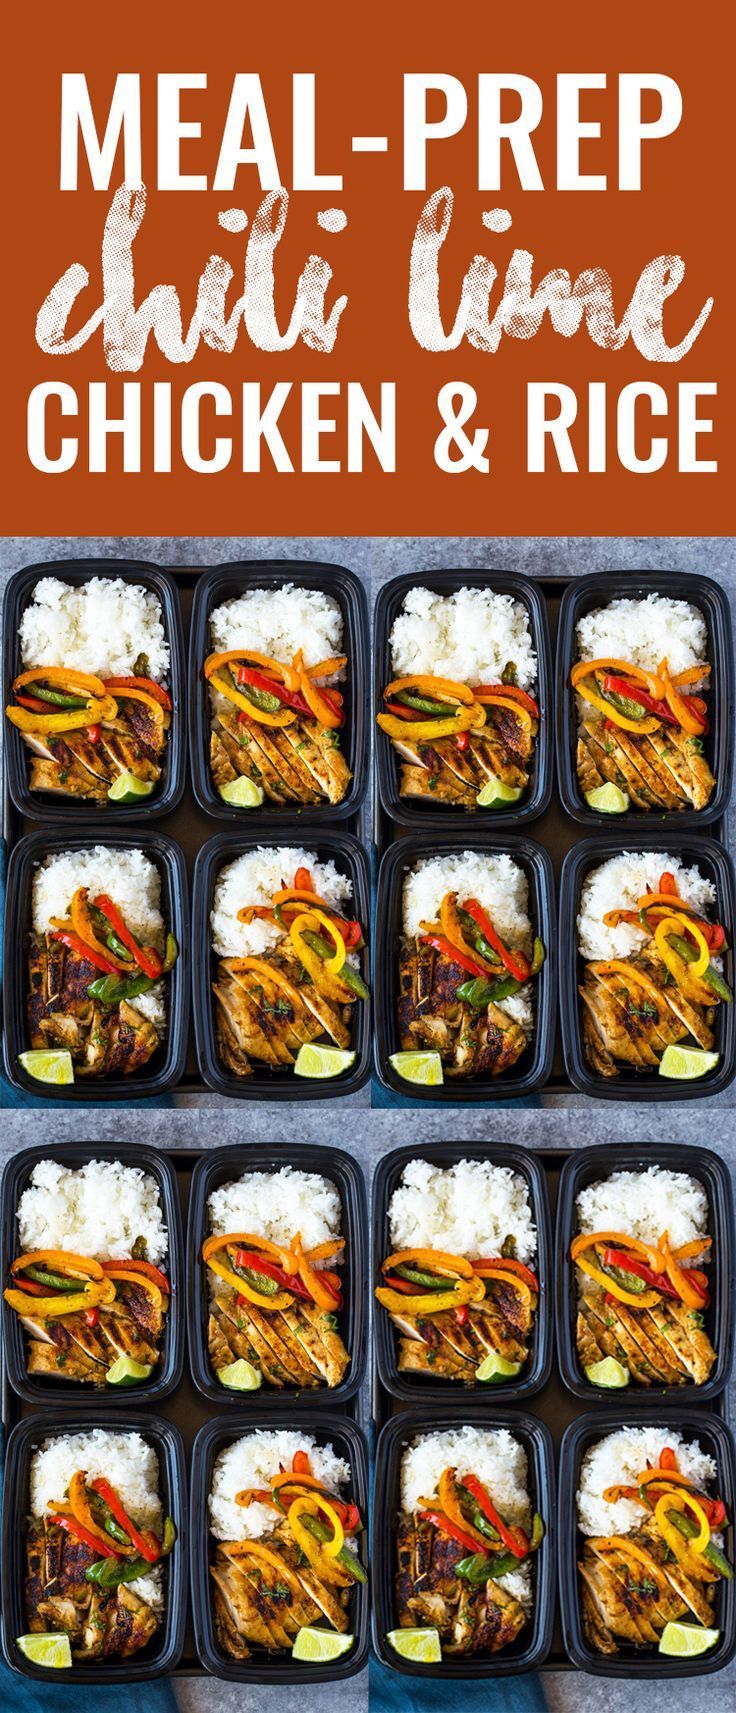 Chili Lime Chicken and Rice Meal Prep Bowls -   19 meal prep recipes healthy easy ideas